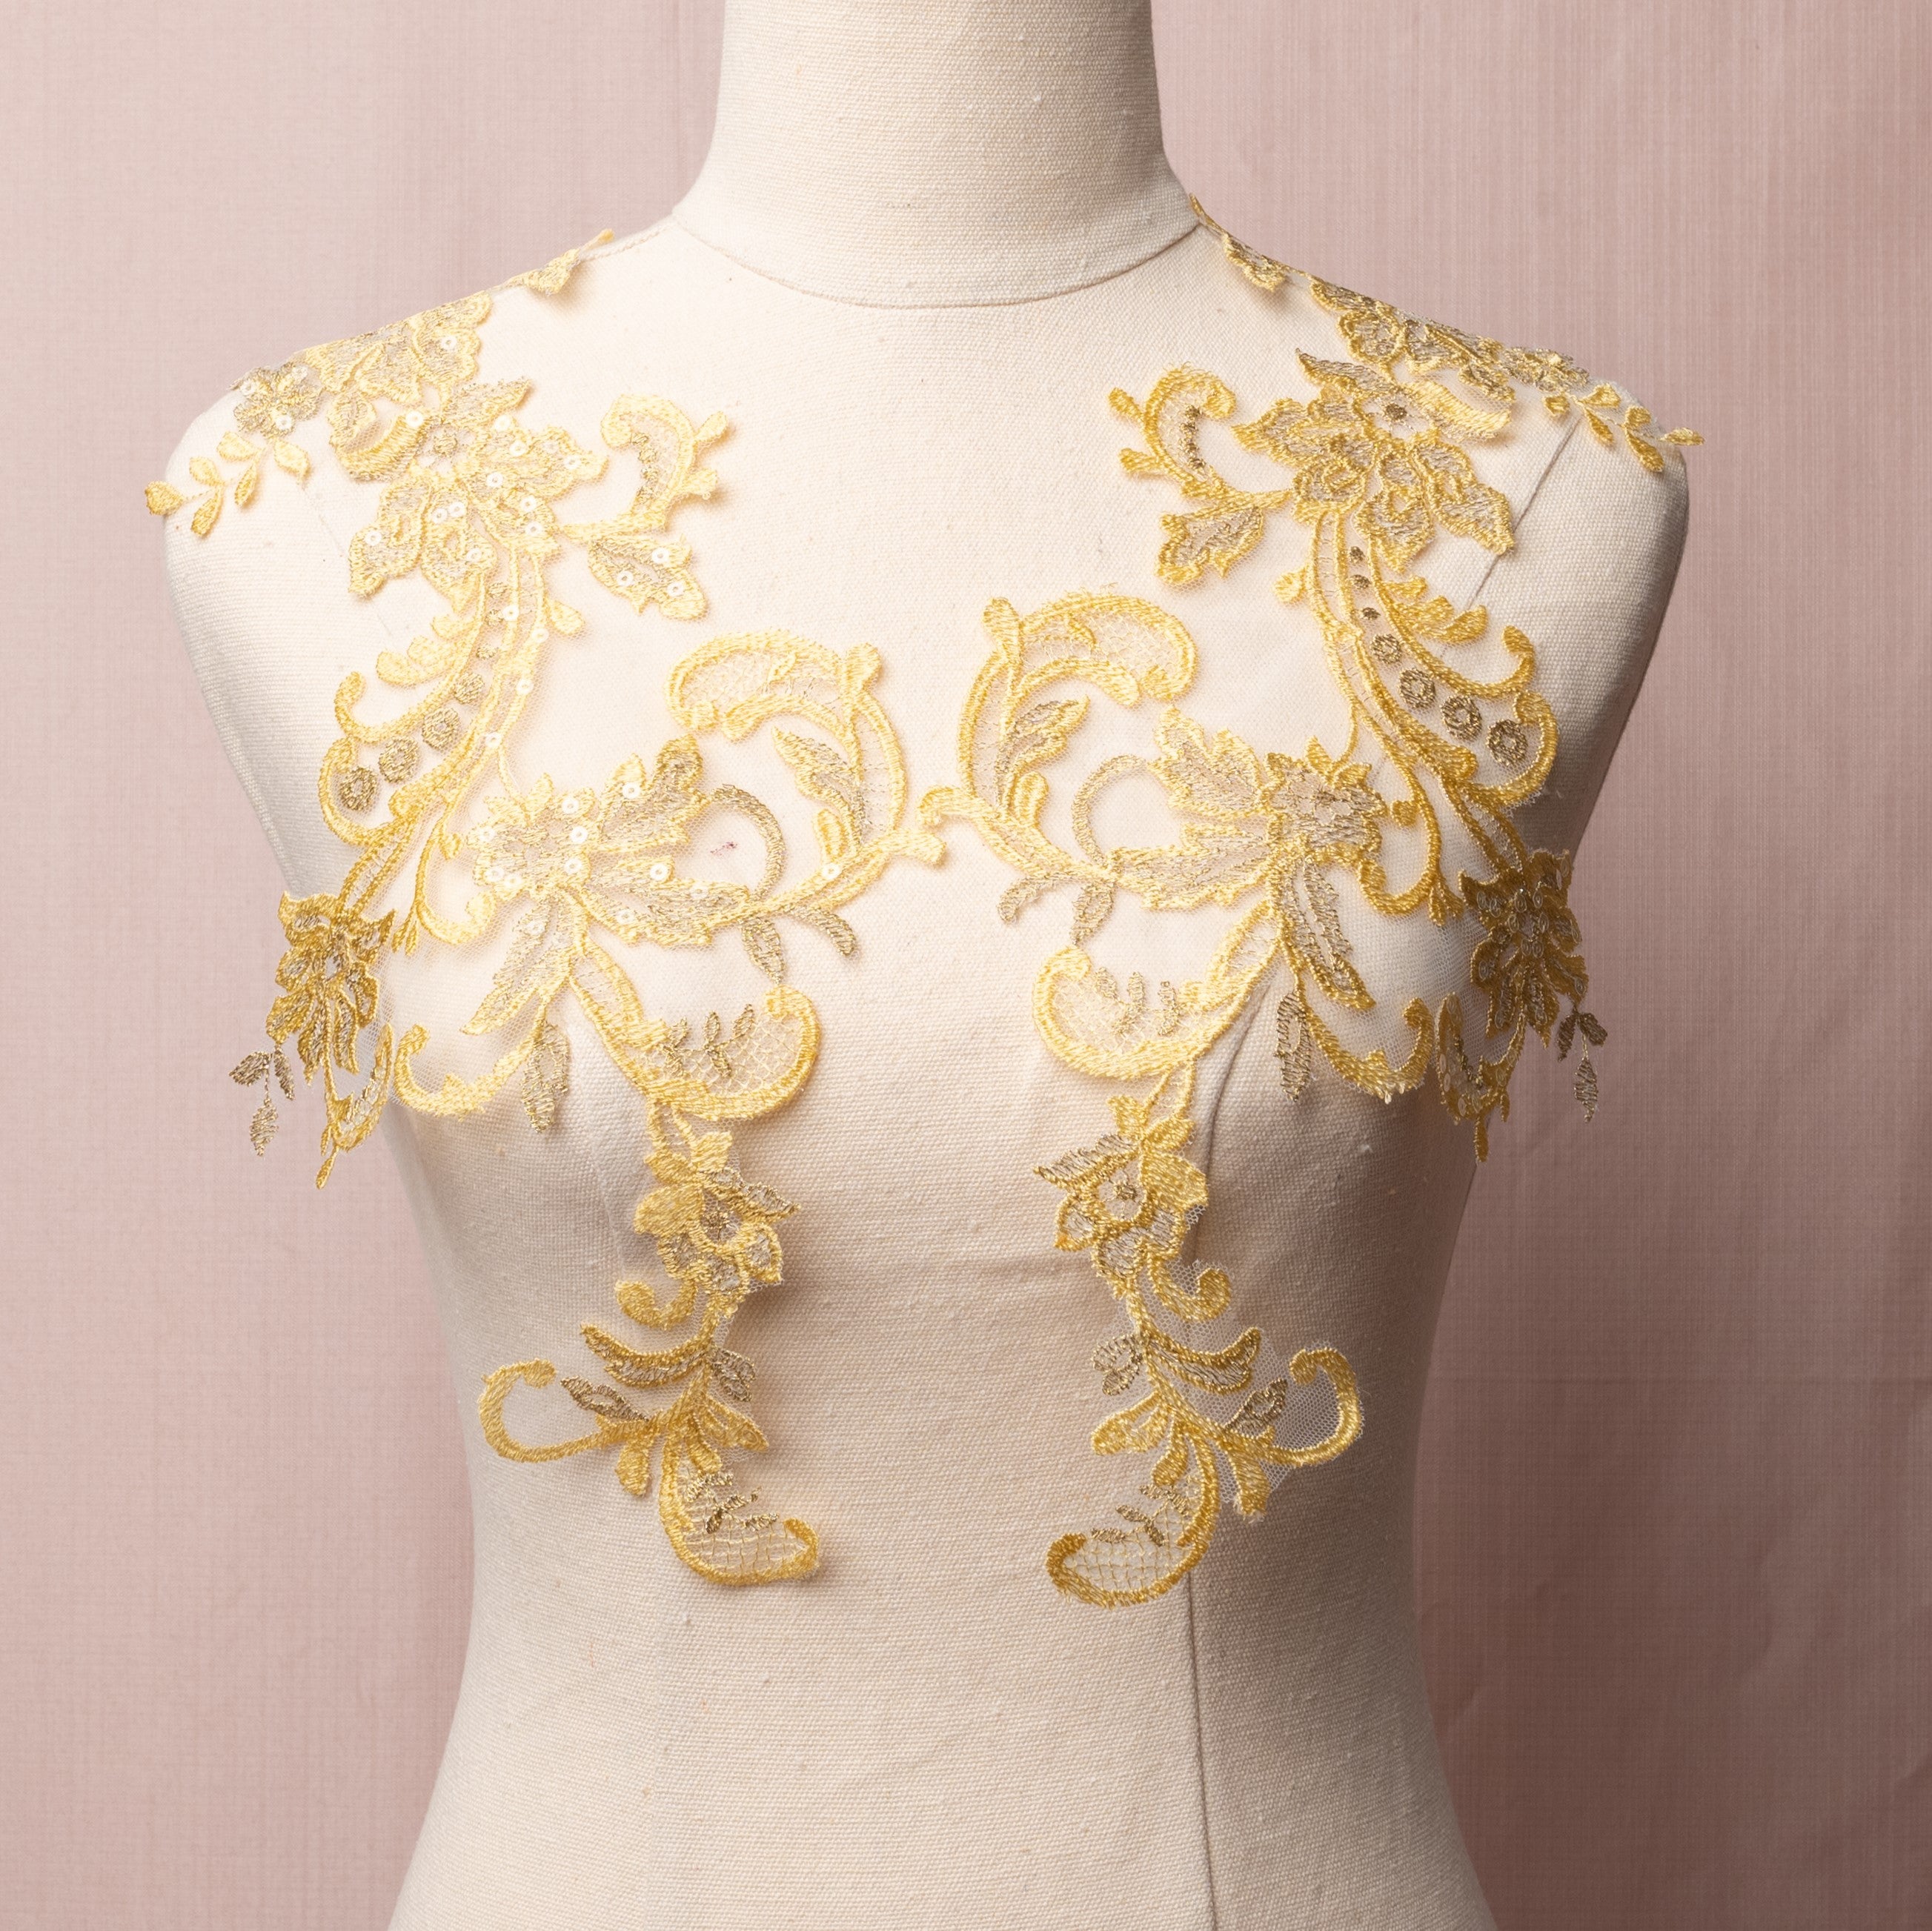 A golden yellow floral applique pair highlighted with gold thread on the leaves and flower petals.  The applique is embroidered onto a very fine net and sprinkled with clear sequins and is displayed on a mannequin.